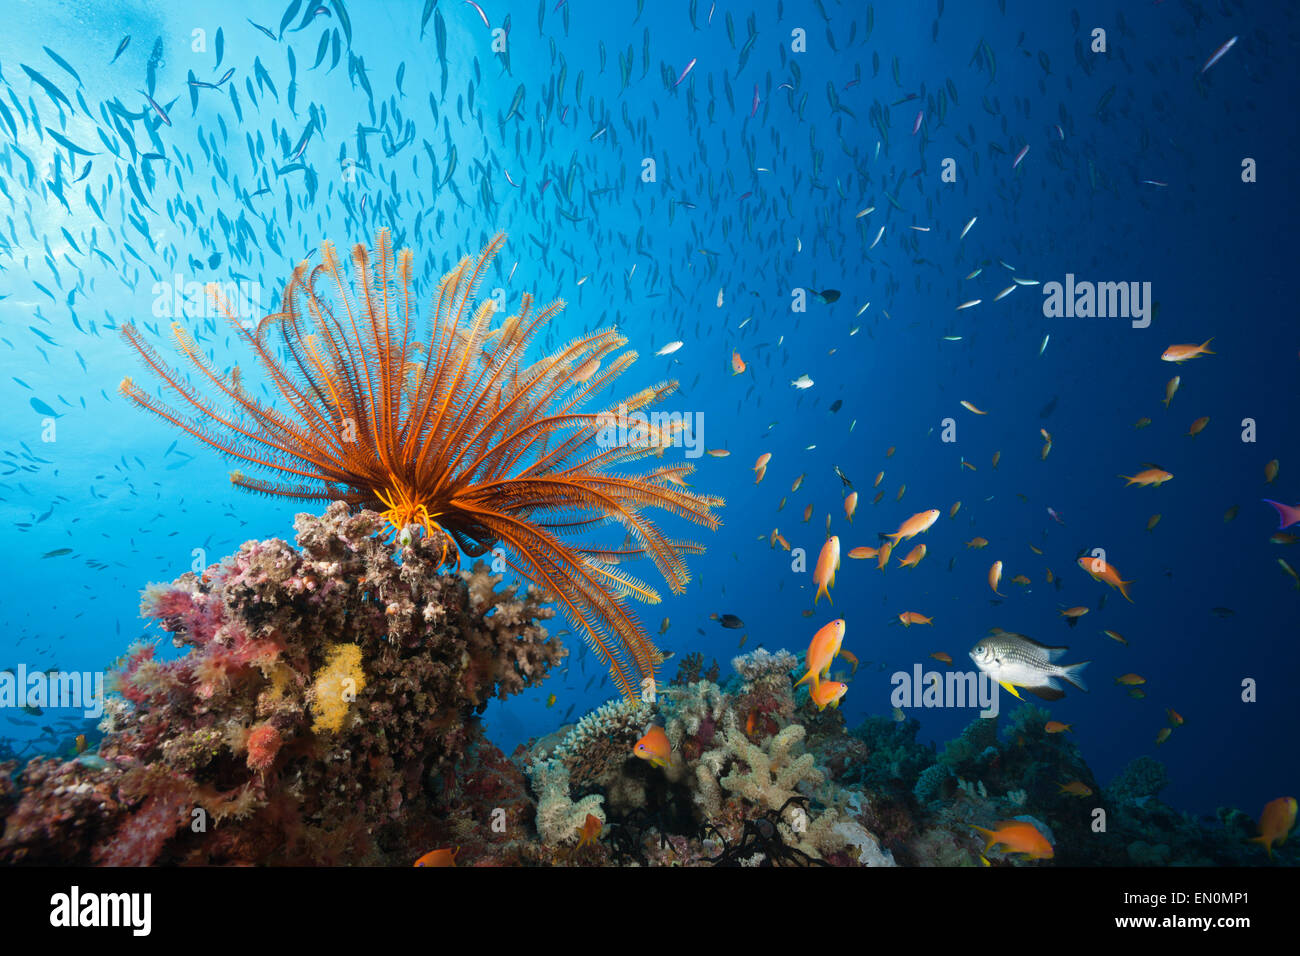 Reef Scene with Crinoid and Fishes, Great Barrier Reef, Australia Stock Photo